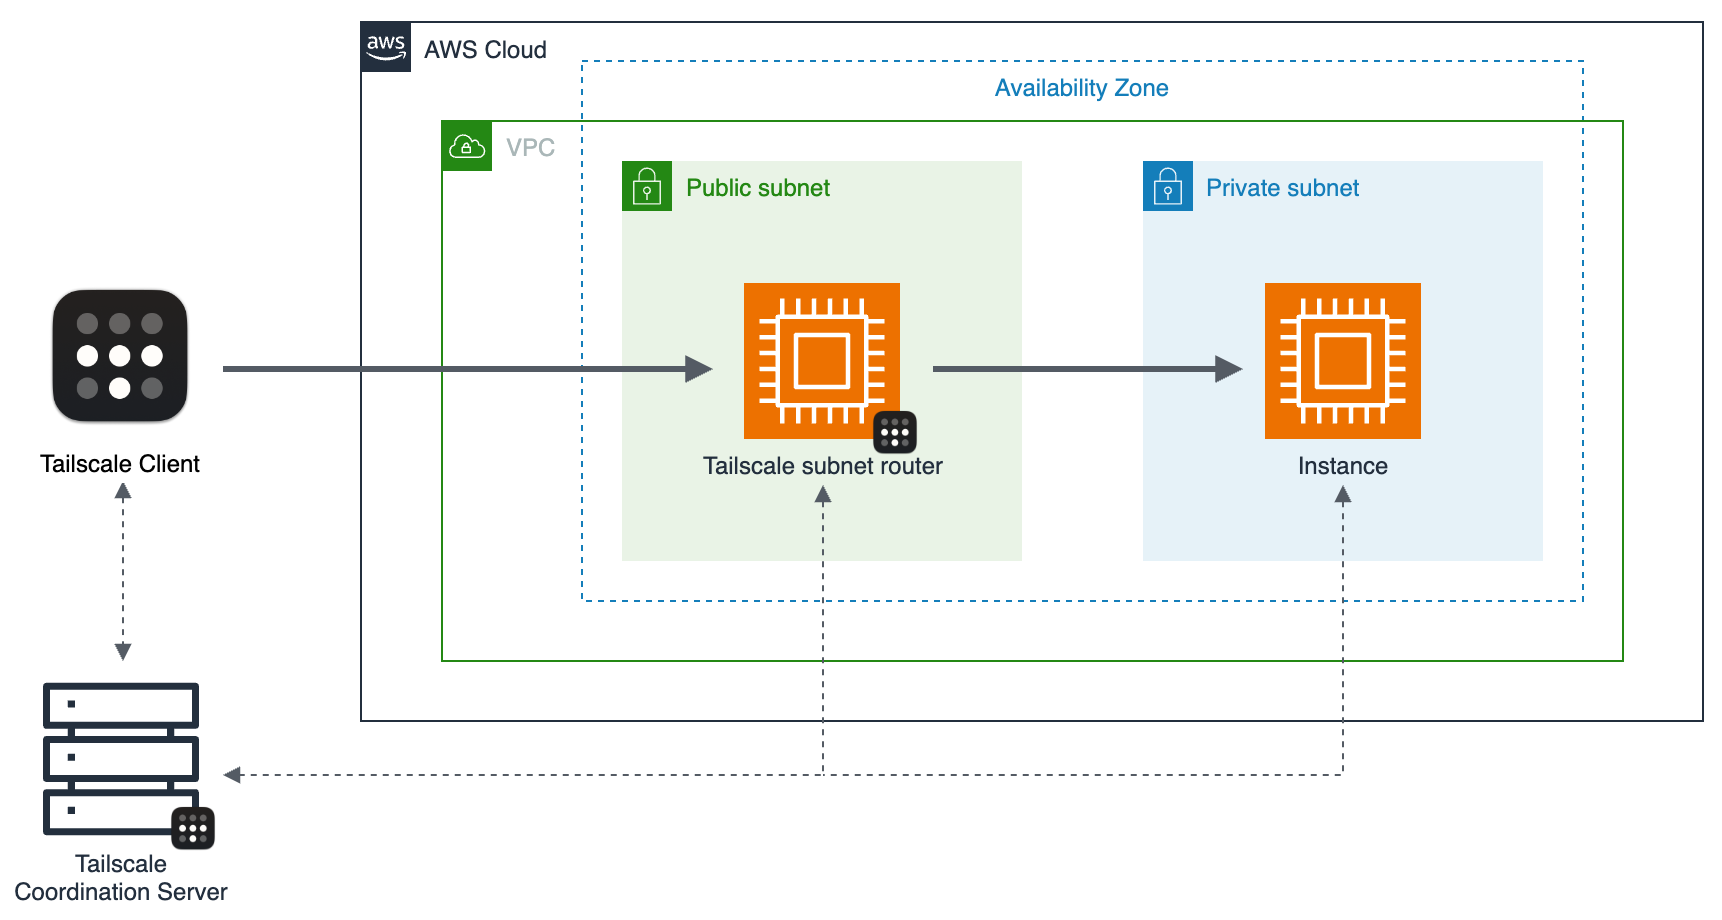 Amazon VPC with Tailscale subnet router